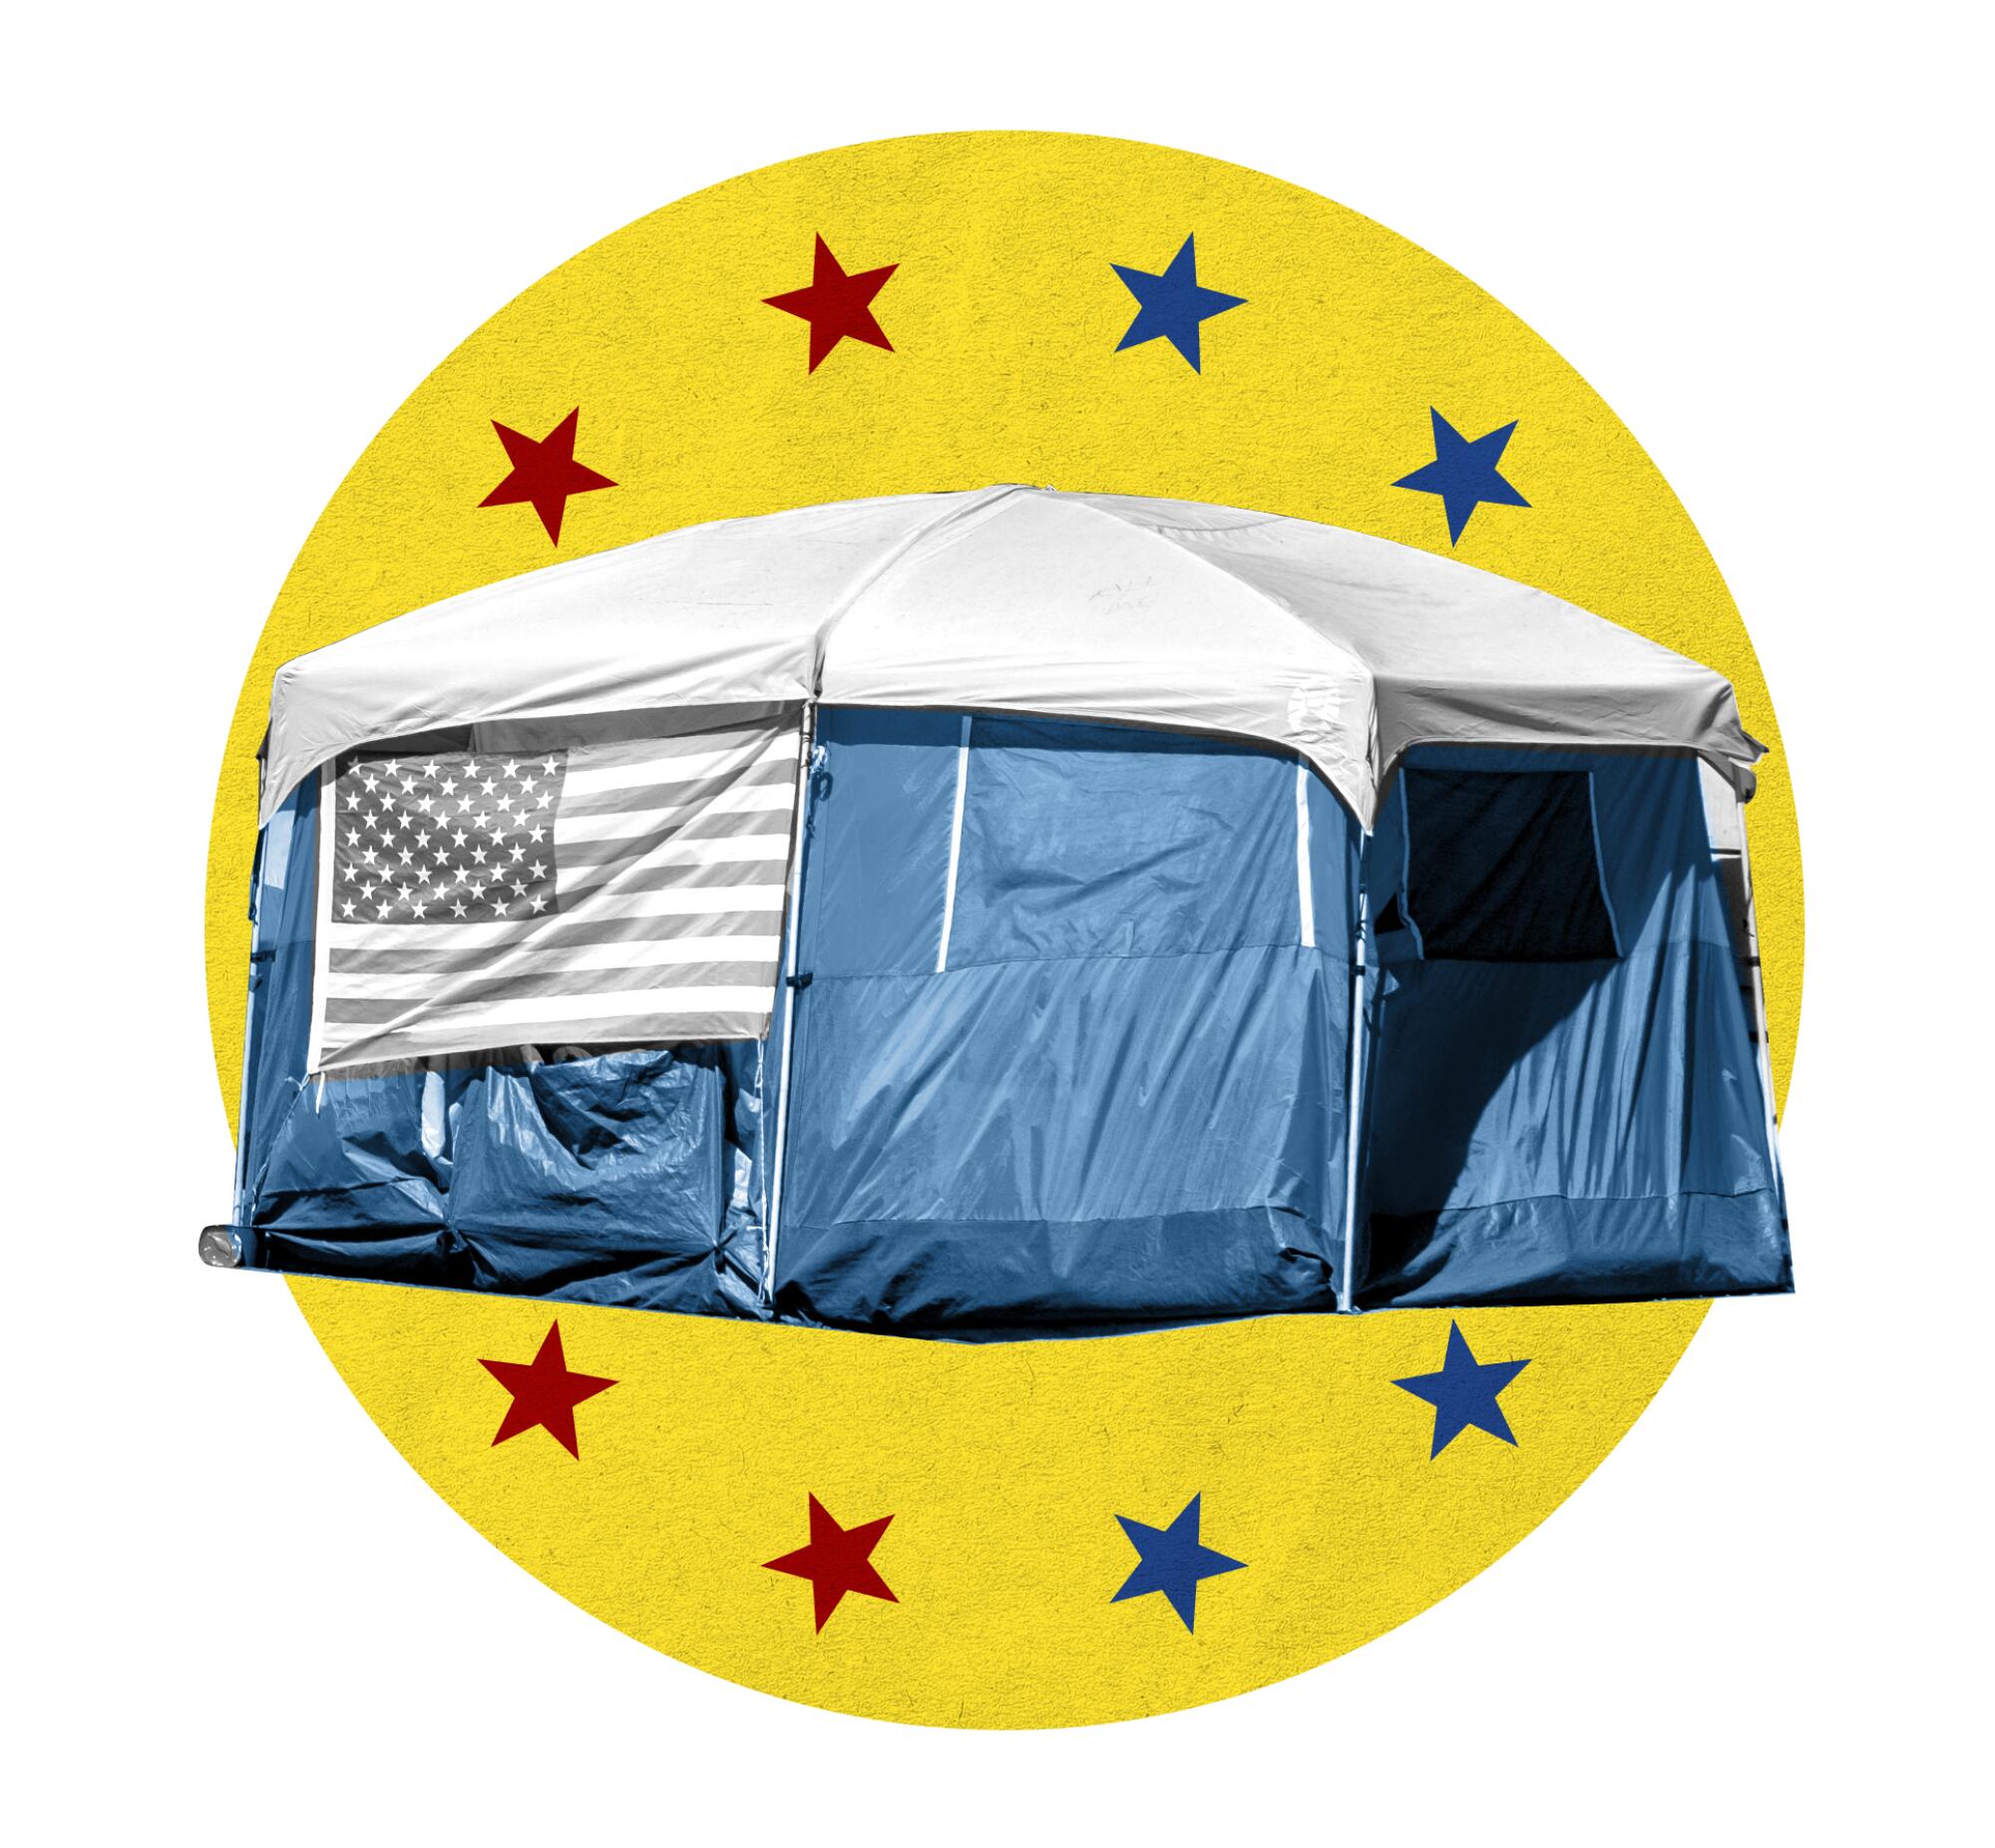 photo of tent with US flag in yellow circle with stars